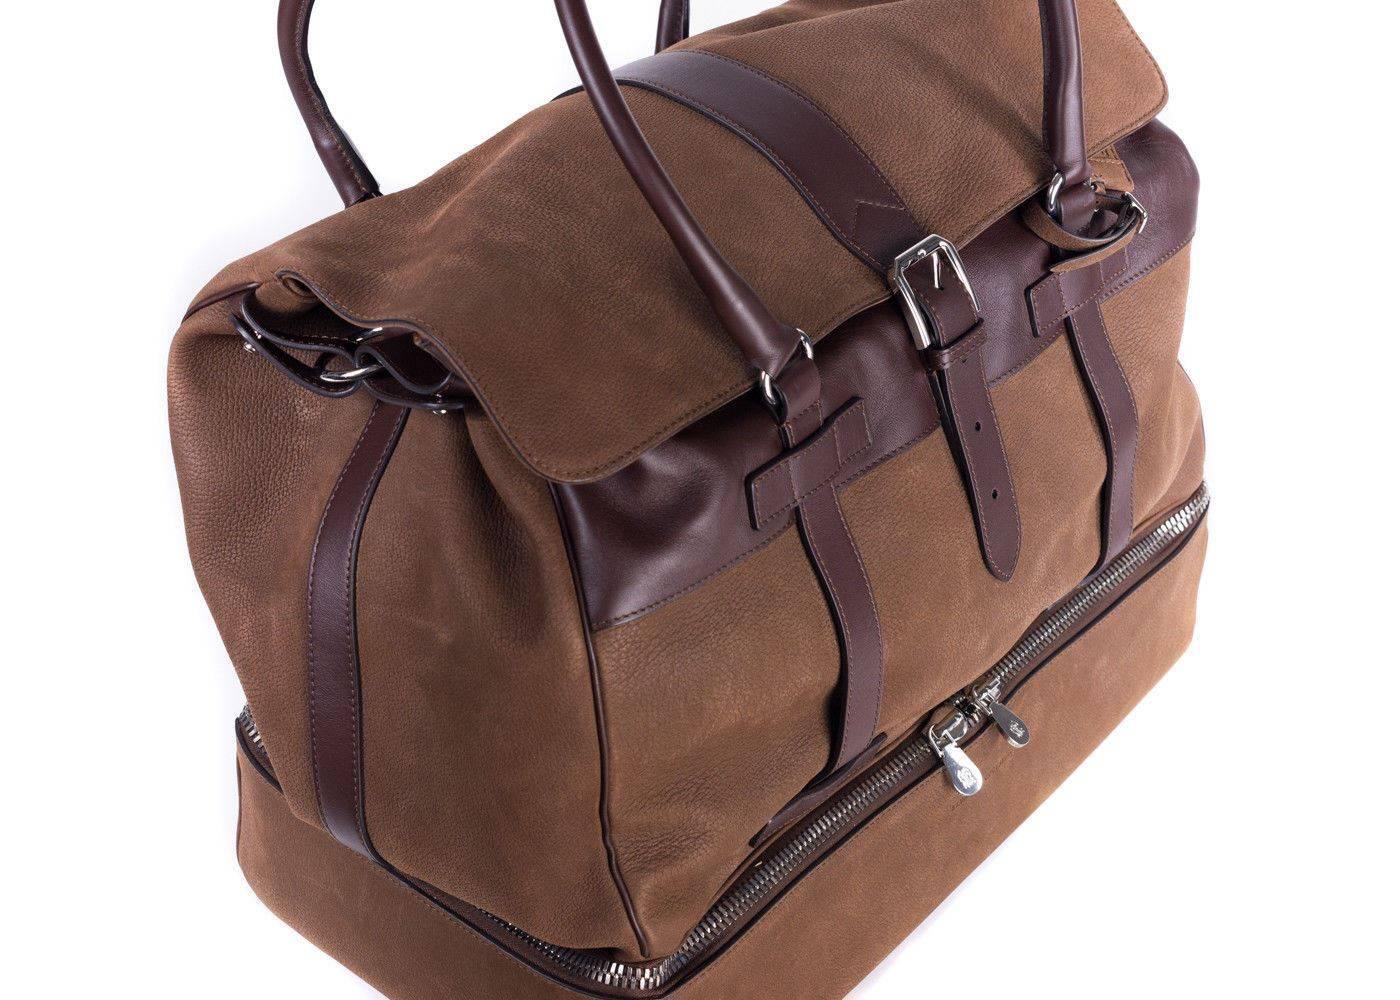 Brand New Brunello Cucinelli Weekender Bag
Dust Bag Included
Retails in Stores & Online for $3175
Dimensions: 18.5